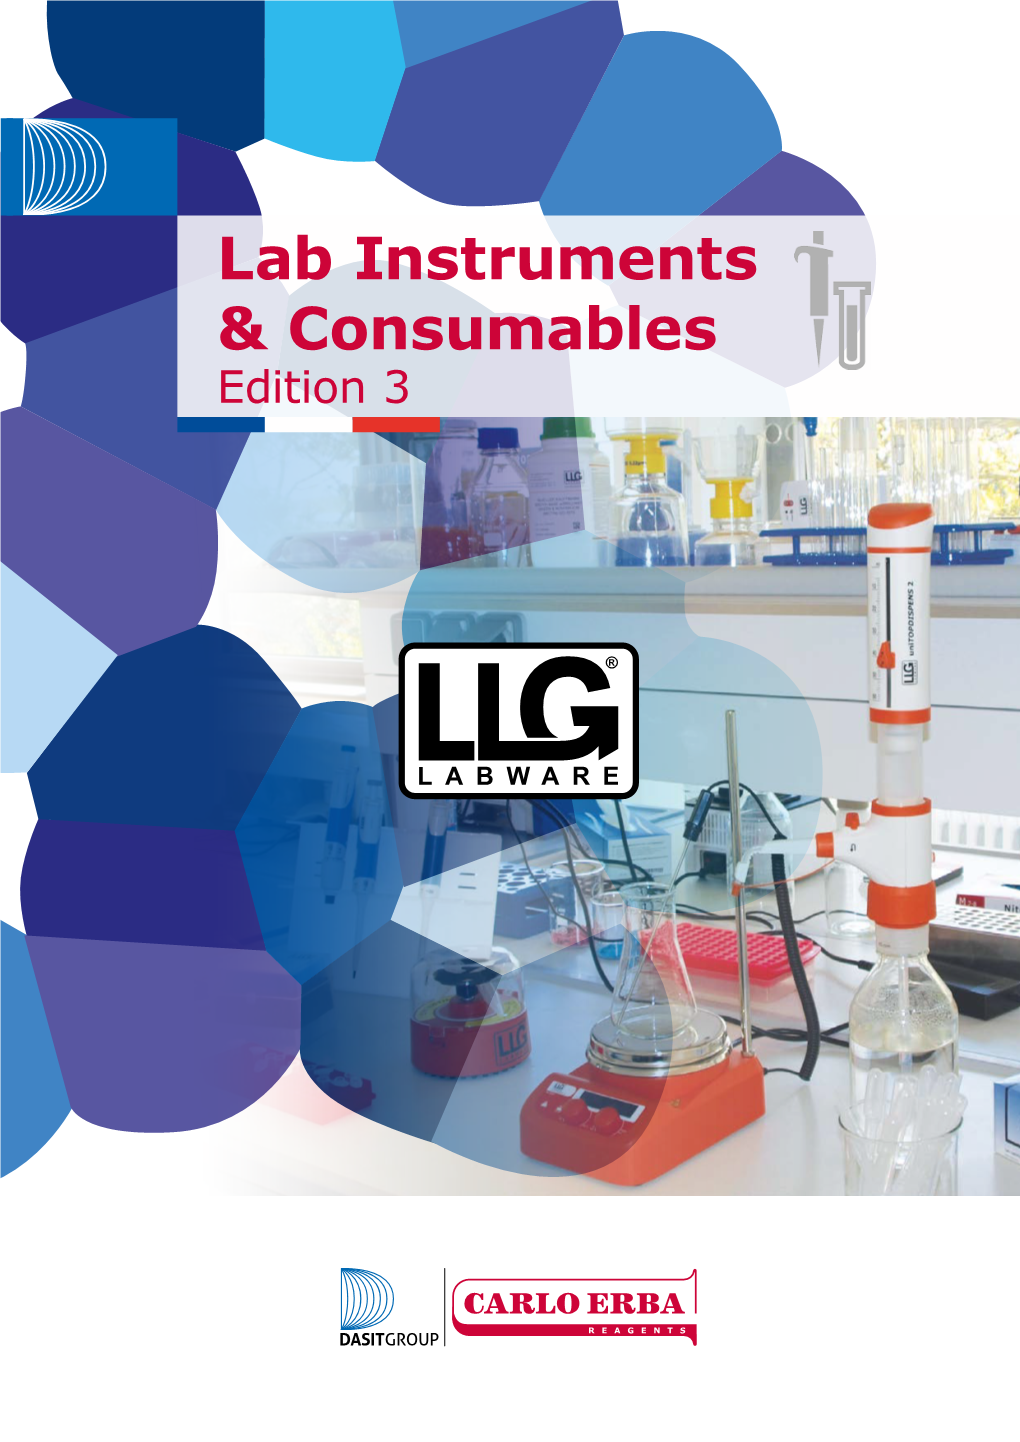 Lab Instruments & Consumables